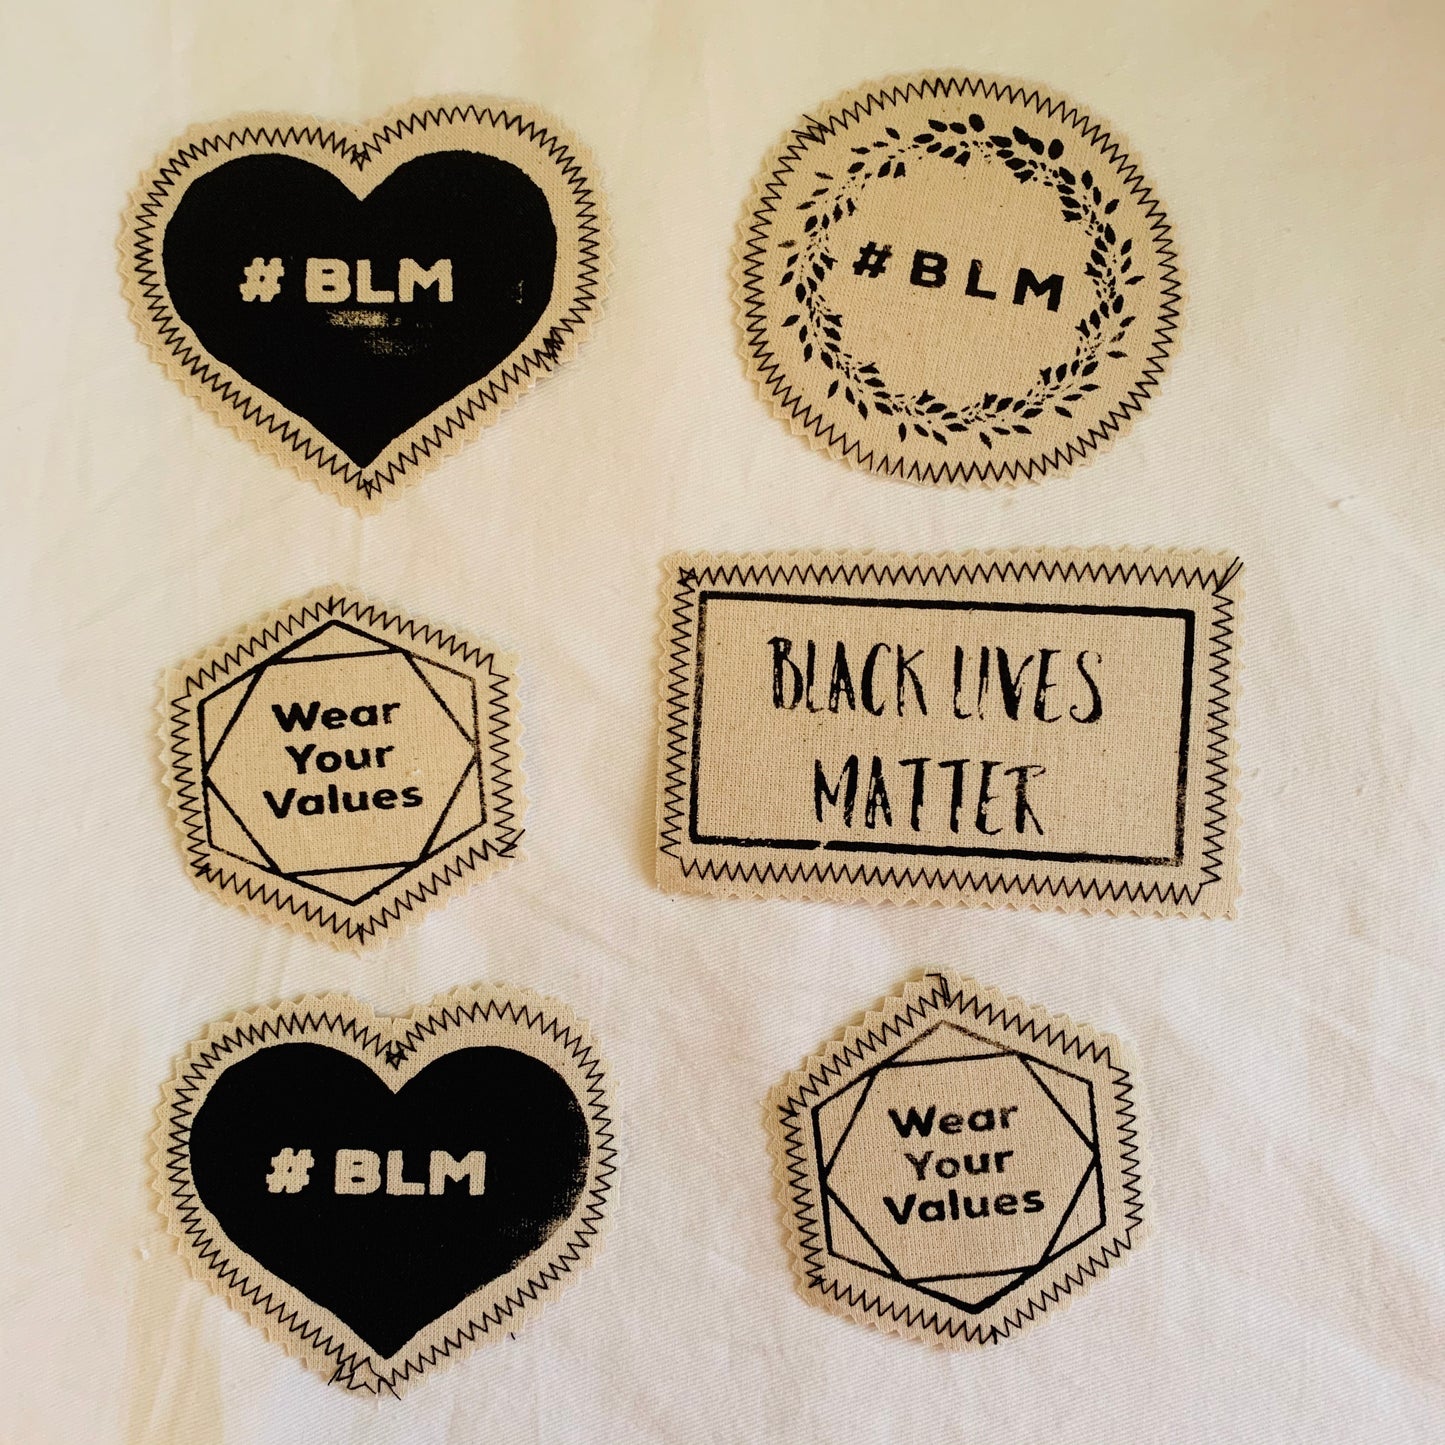 Wear your values sew on patches